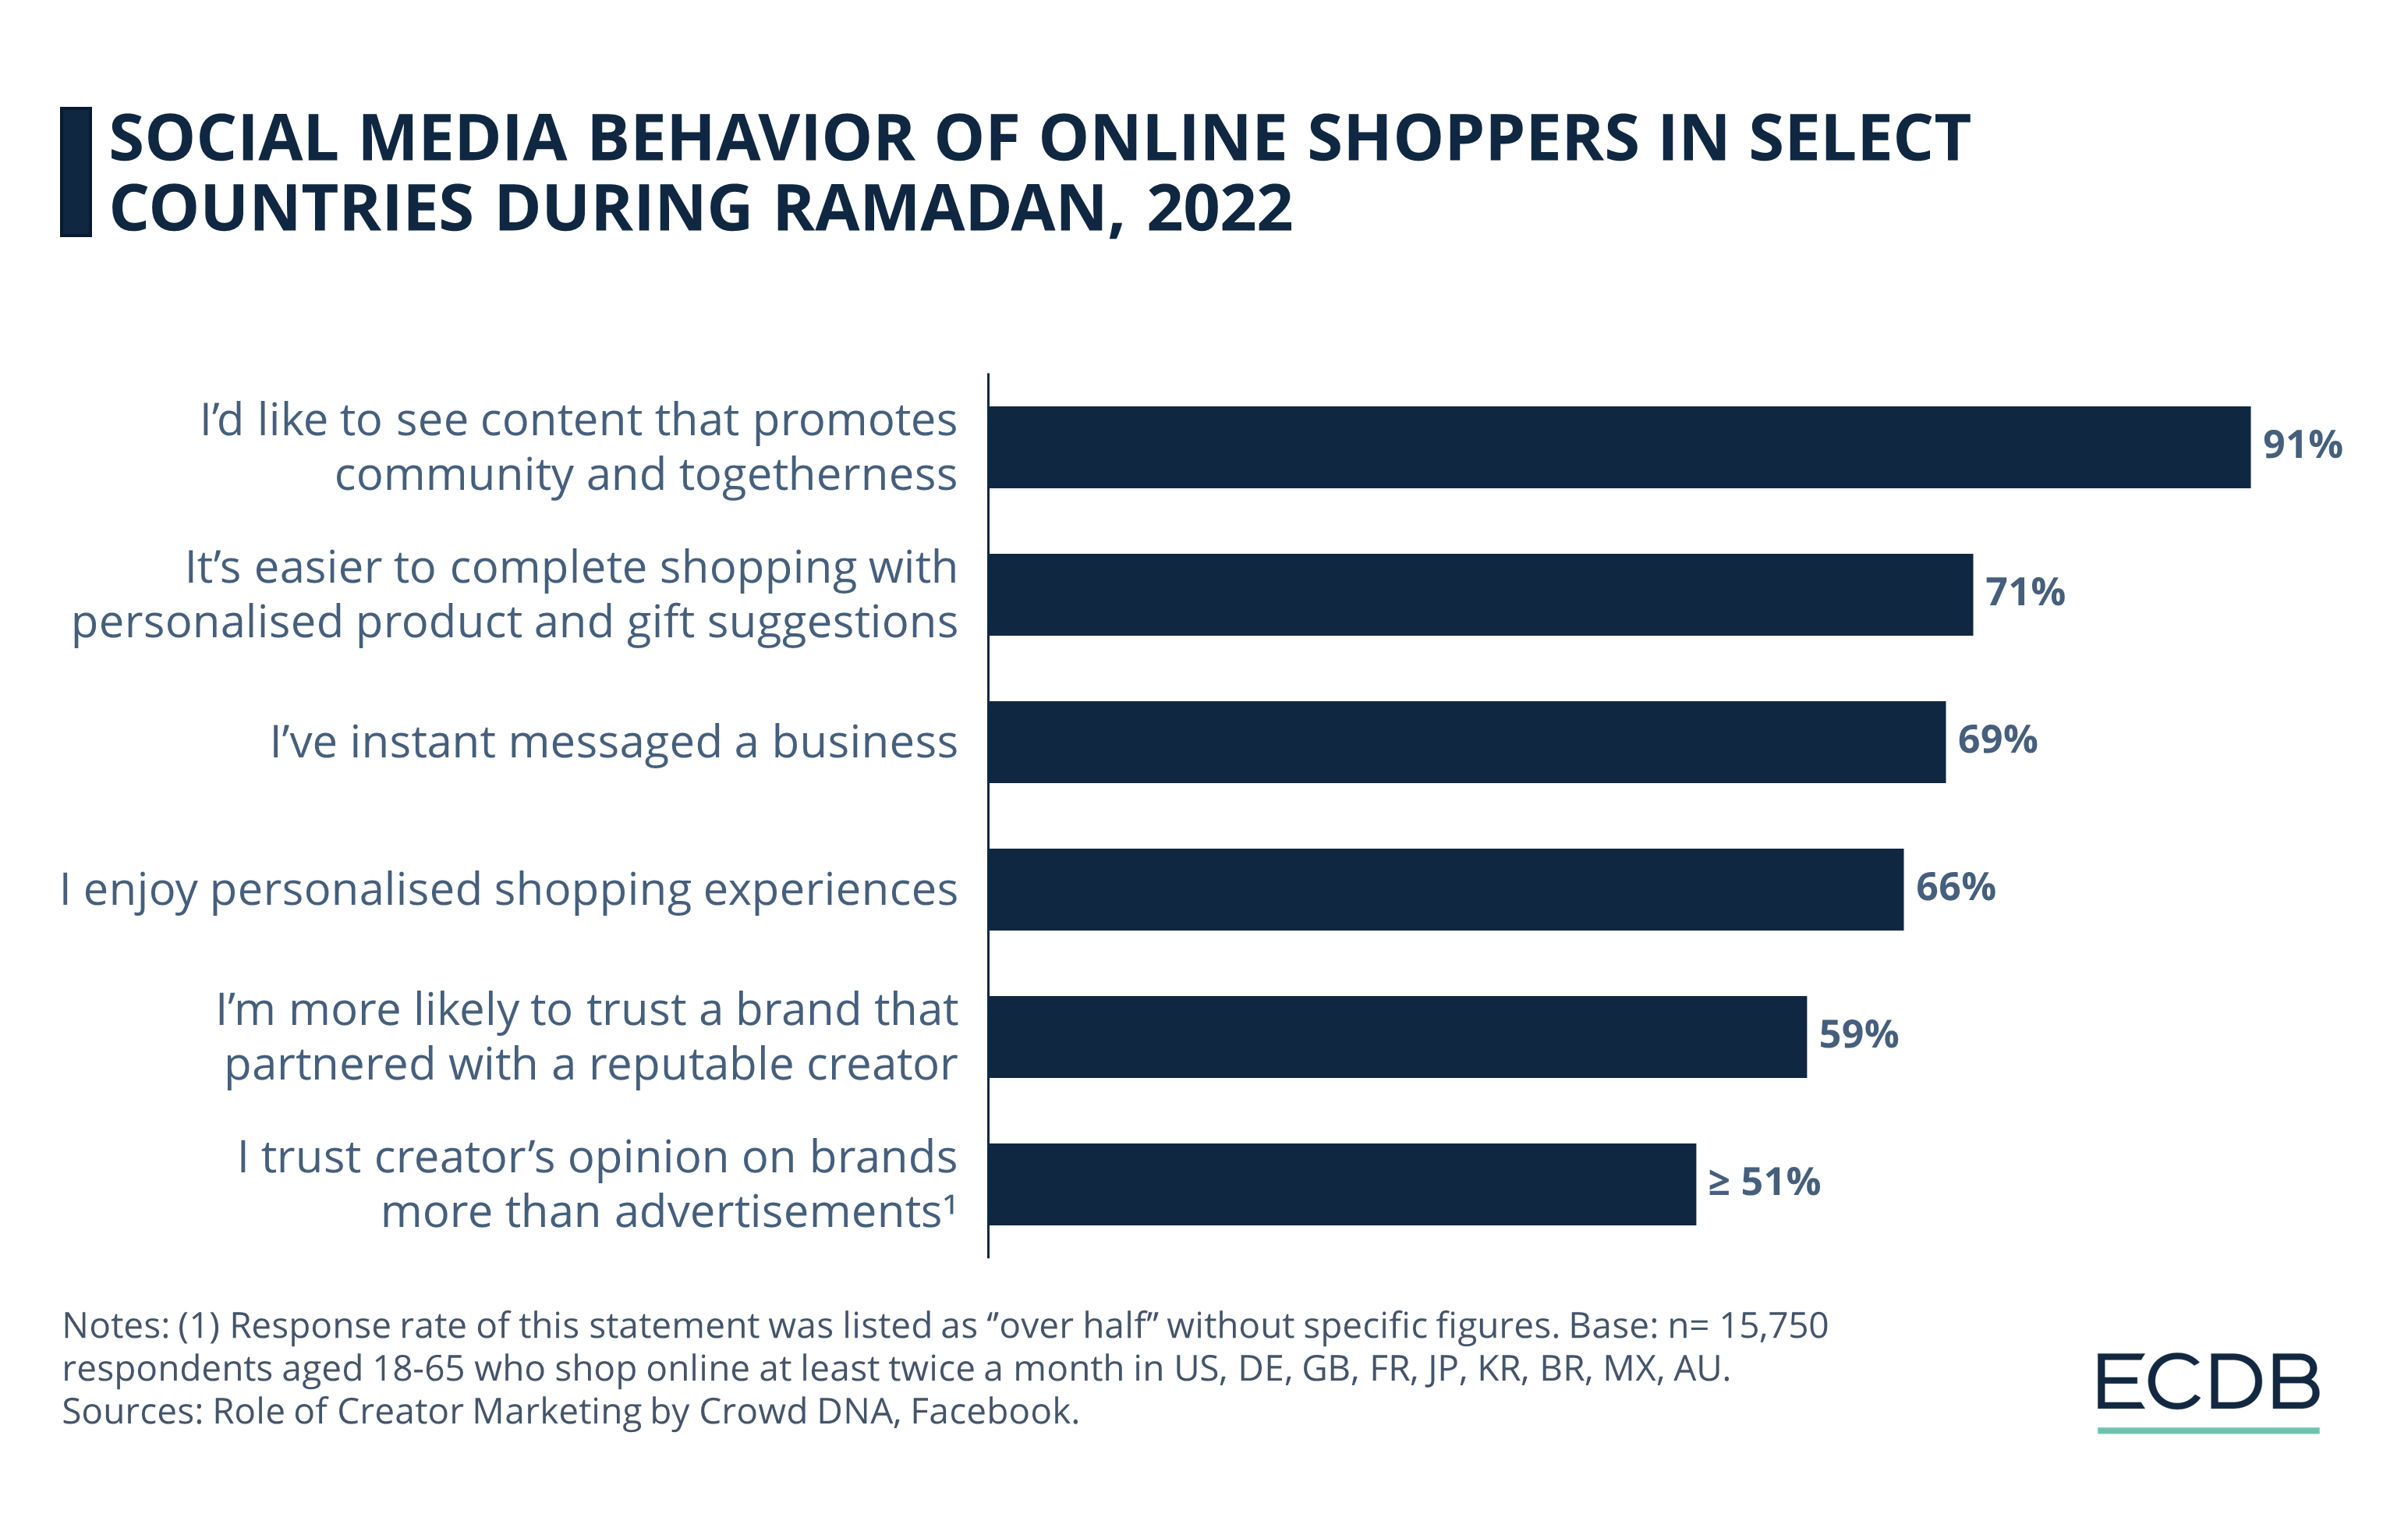 Social Media Behavior of Online Shoppers in Select Countries During Ramadan, 2022